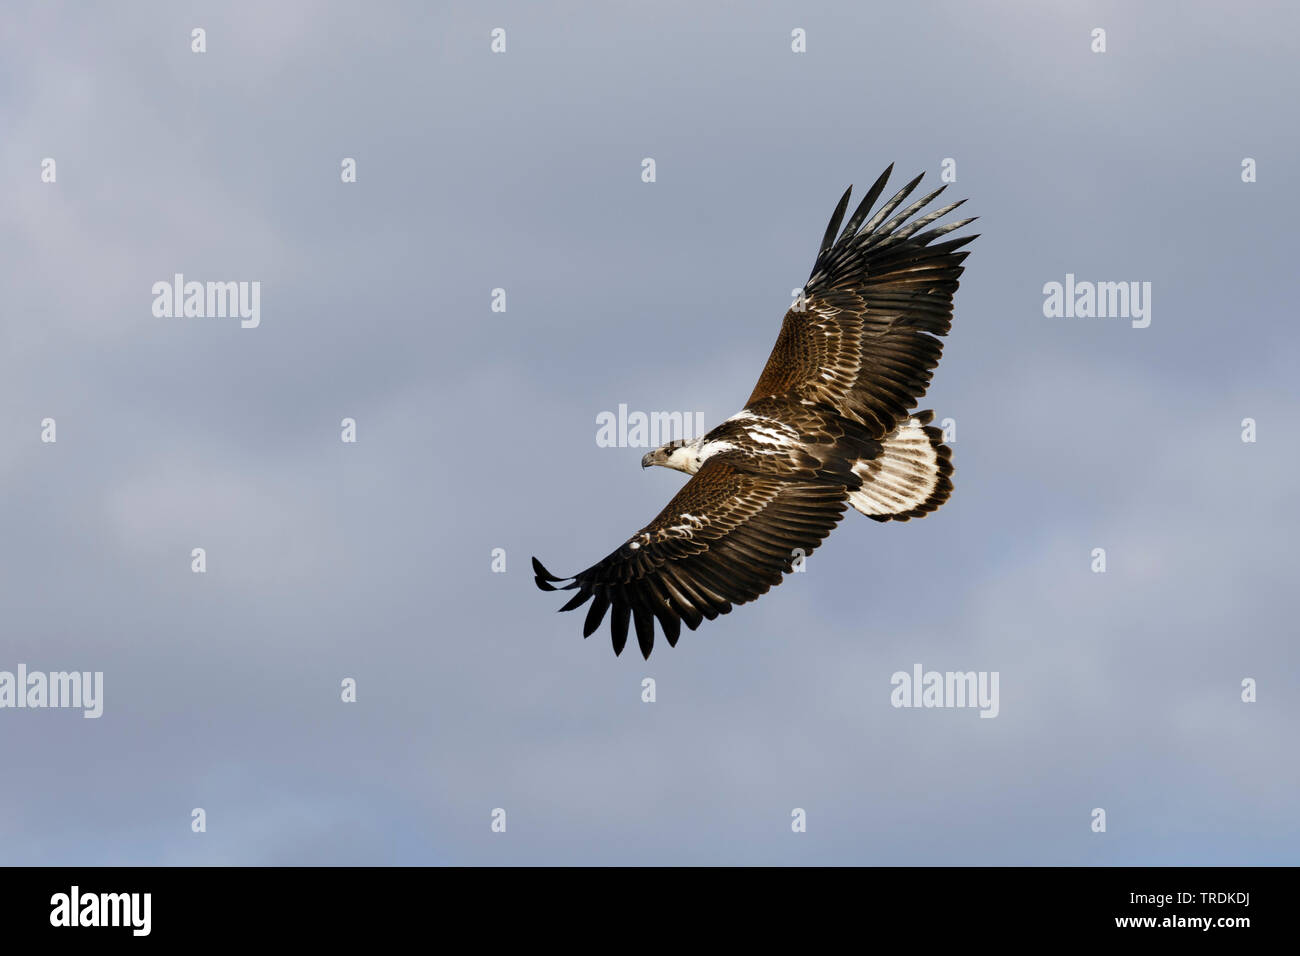 African fish eagle (Haliaeetus vocifer), juvenile bird in flight, view from above, South Africa, Lowveld, Krueger National Park Stock Photo